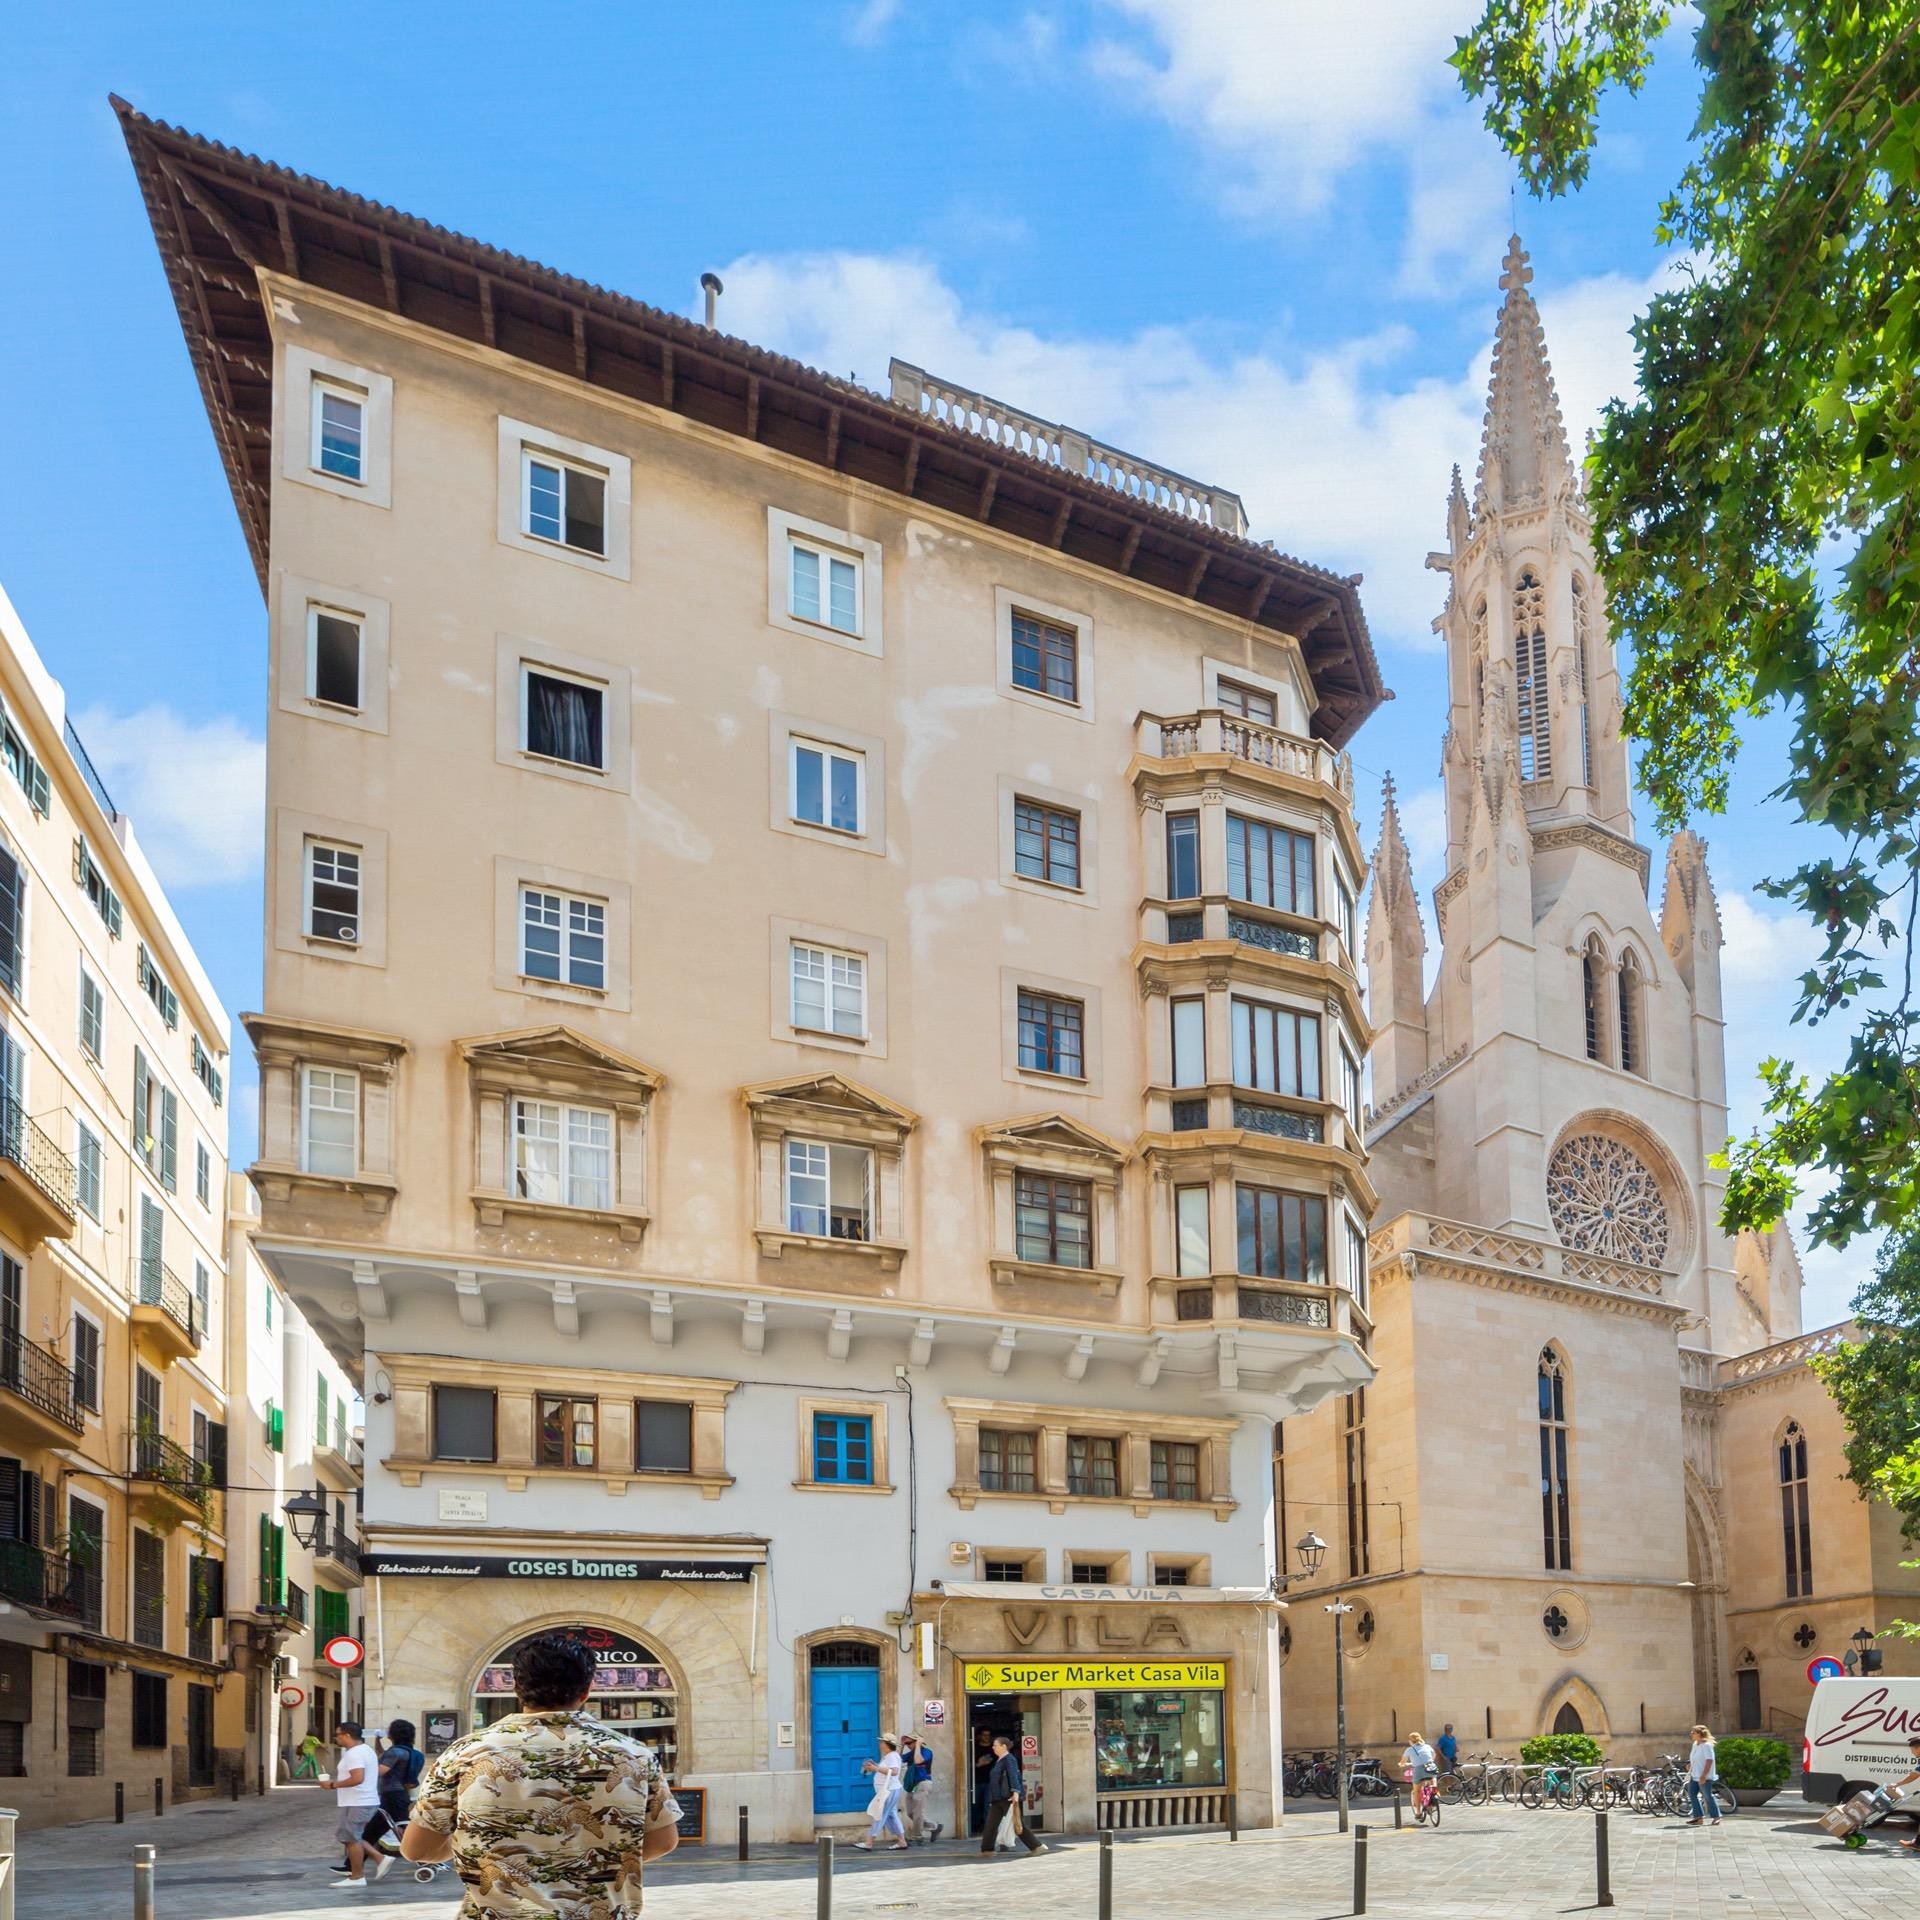 Excellent building for sale in the historic centre of Palma with fabulous views over the whole city